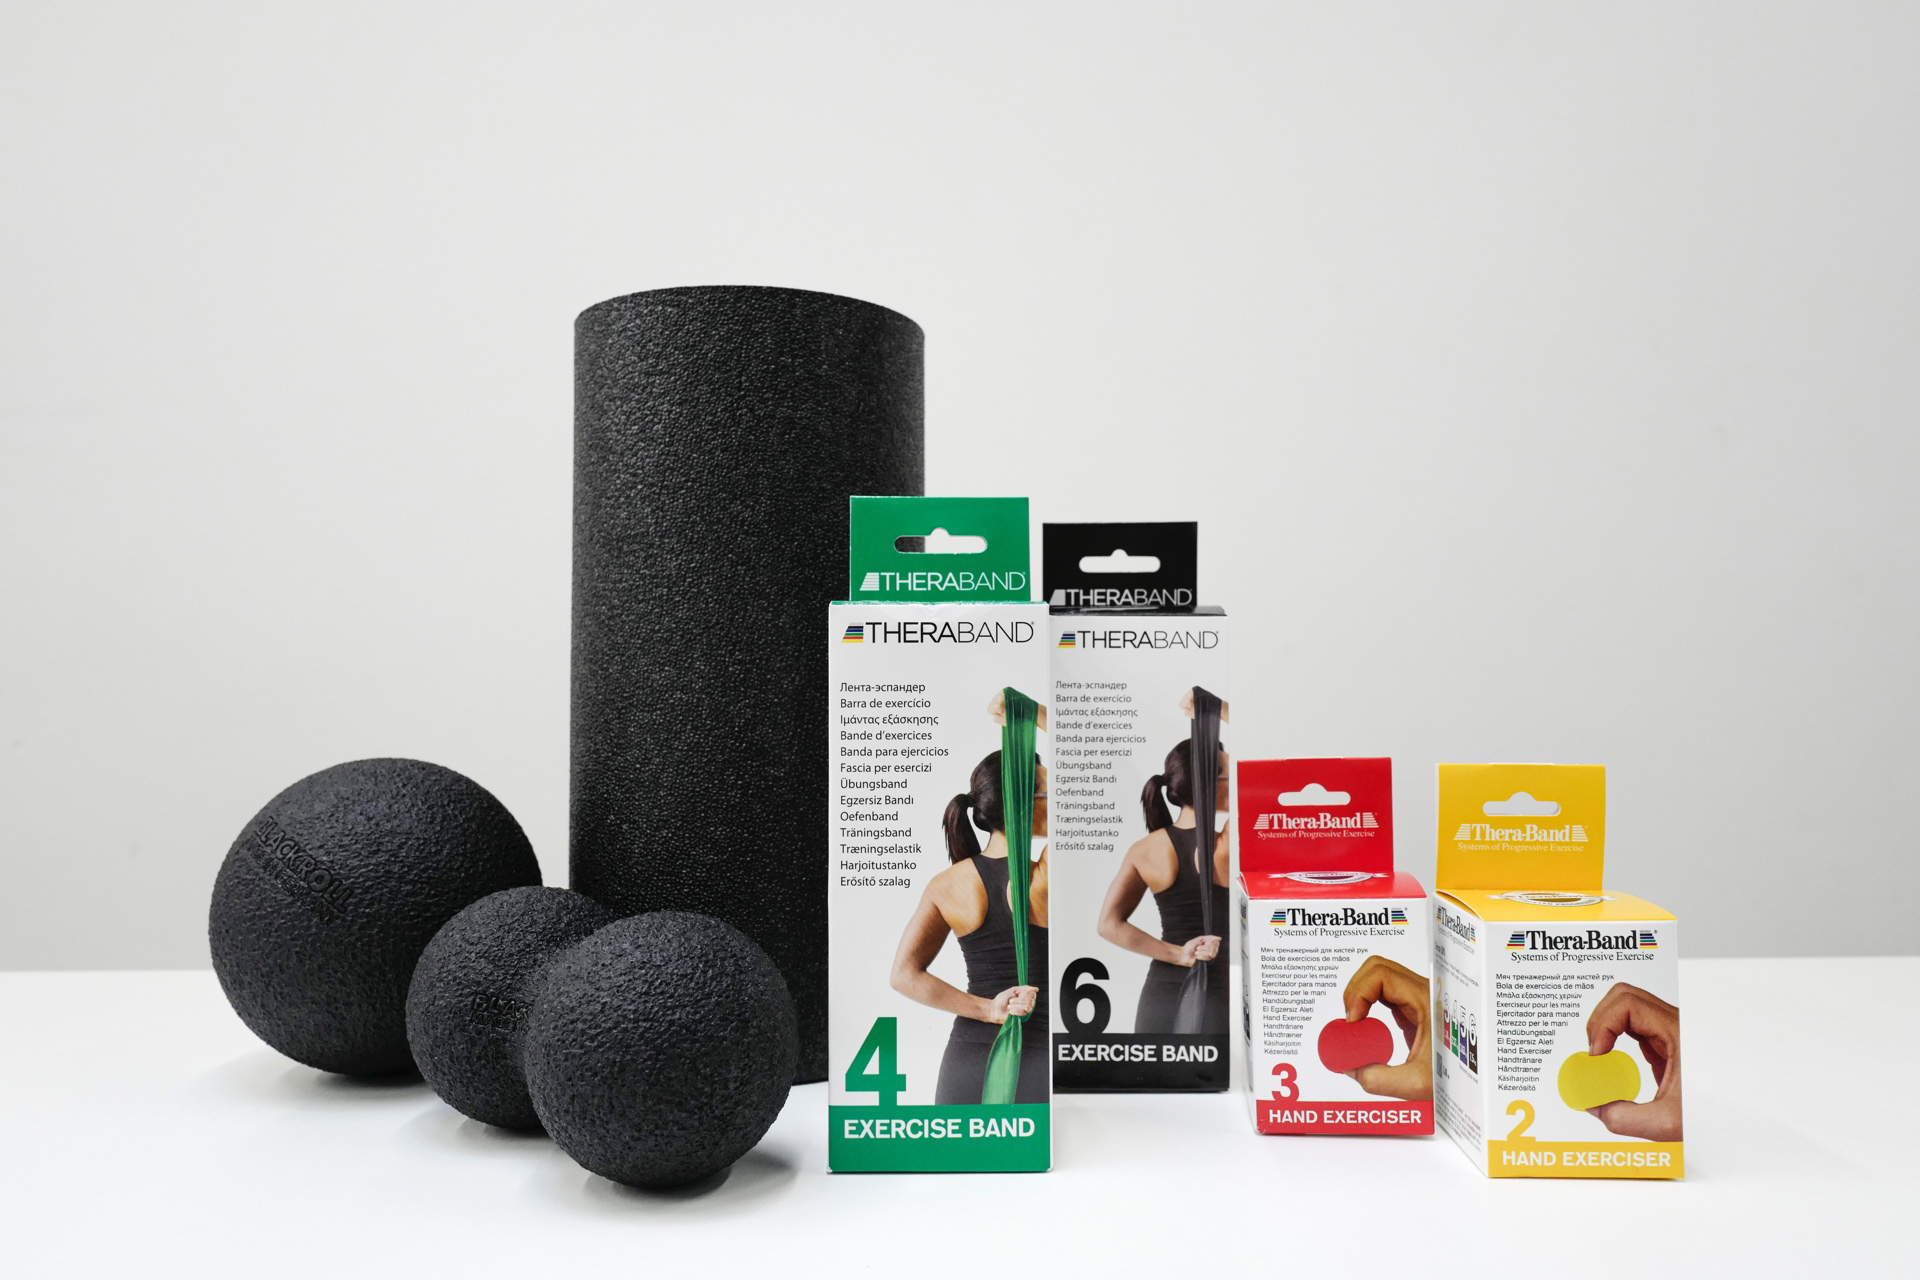 fengbao c max wessely studio frank fitness paket